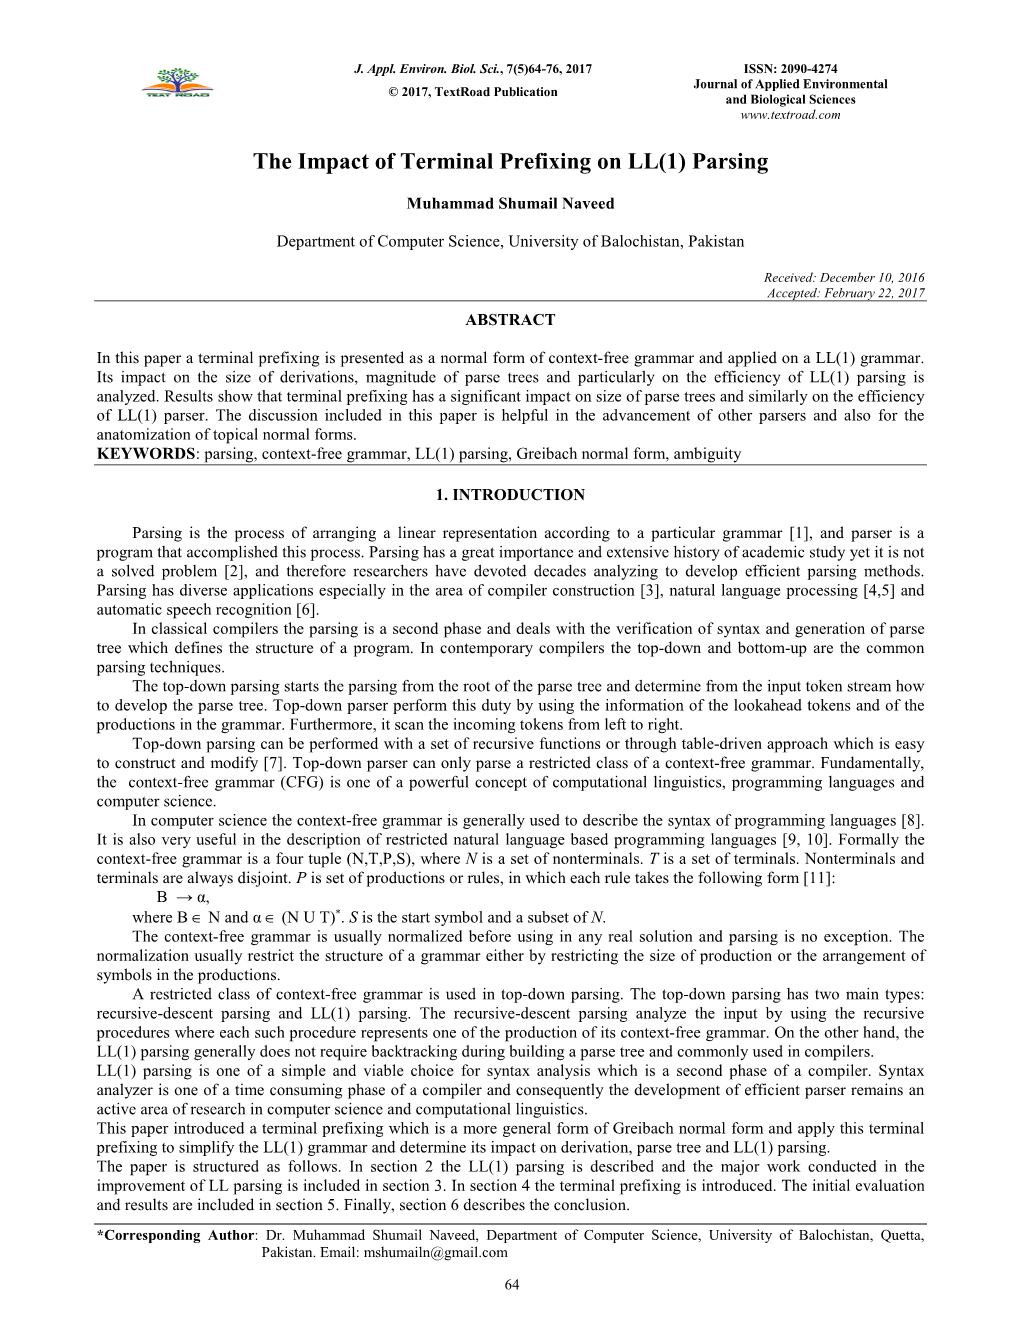 The Impact of Terminal Prefixing on LL(1) Parsing